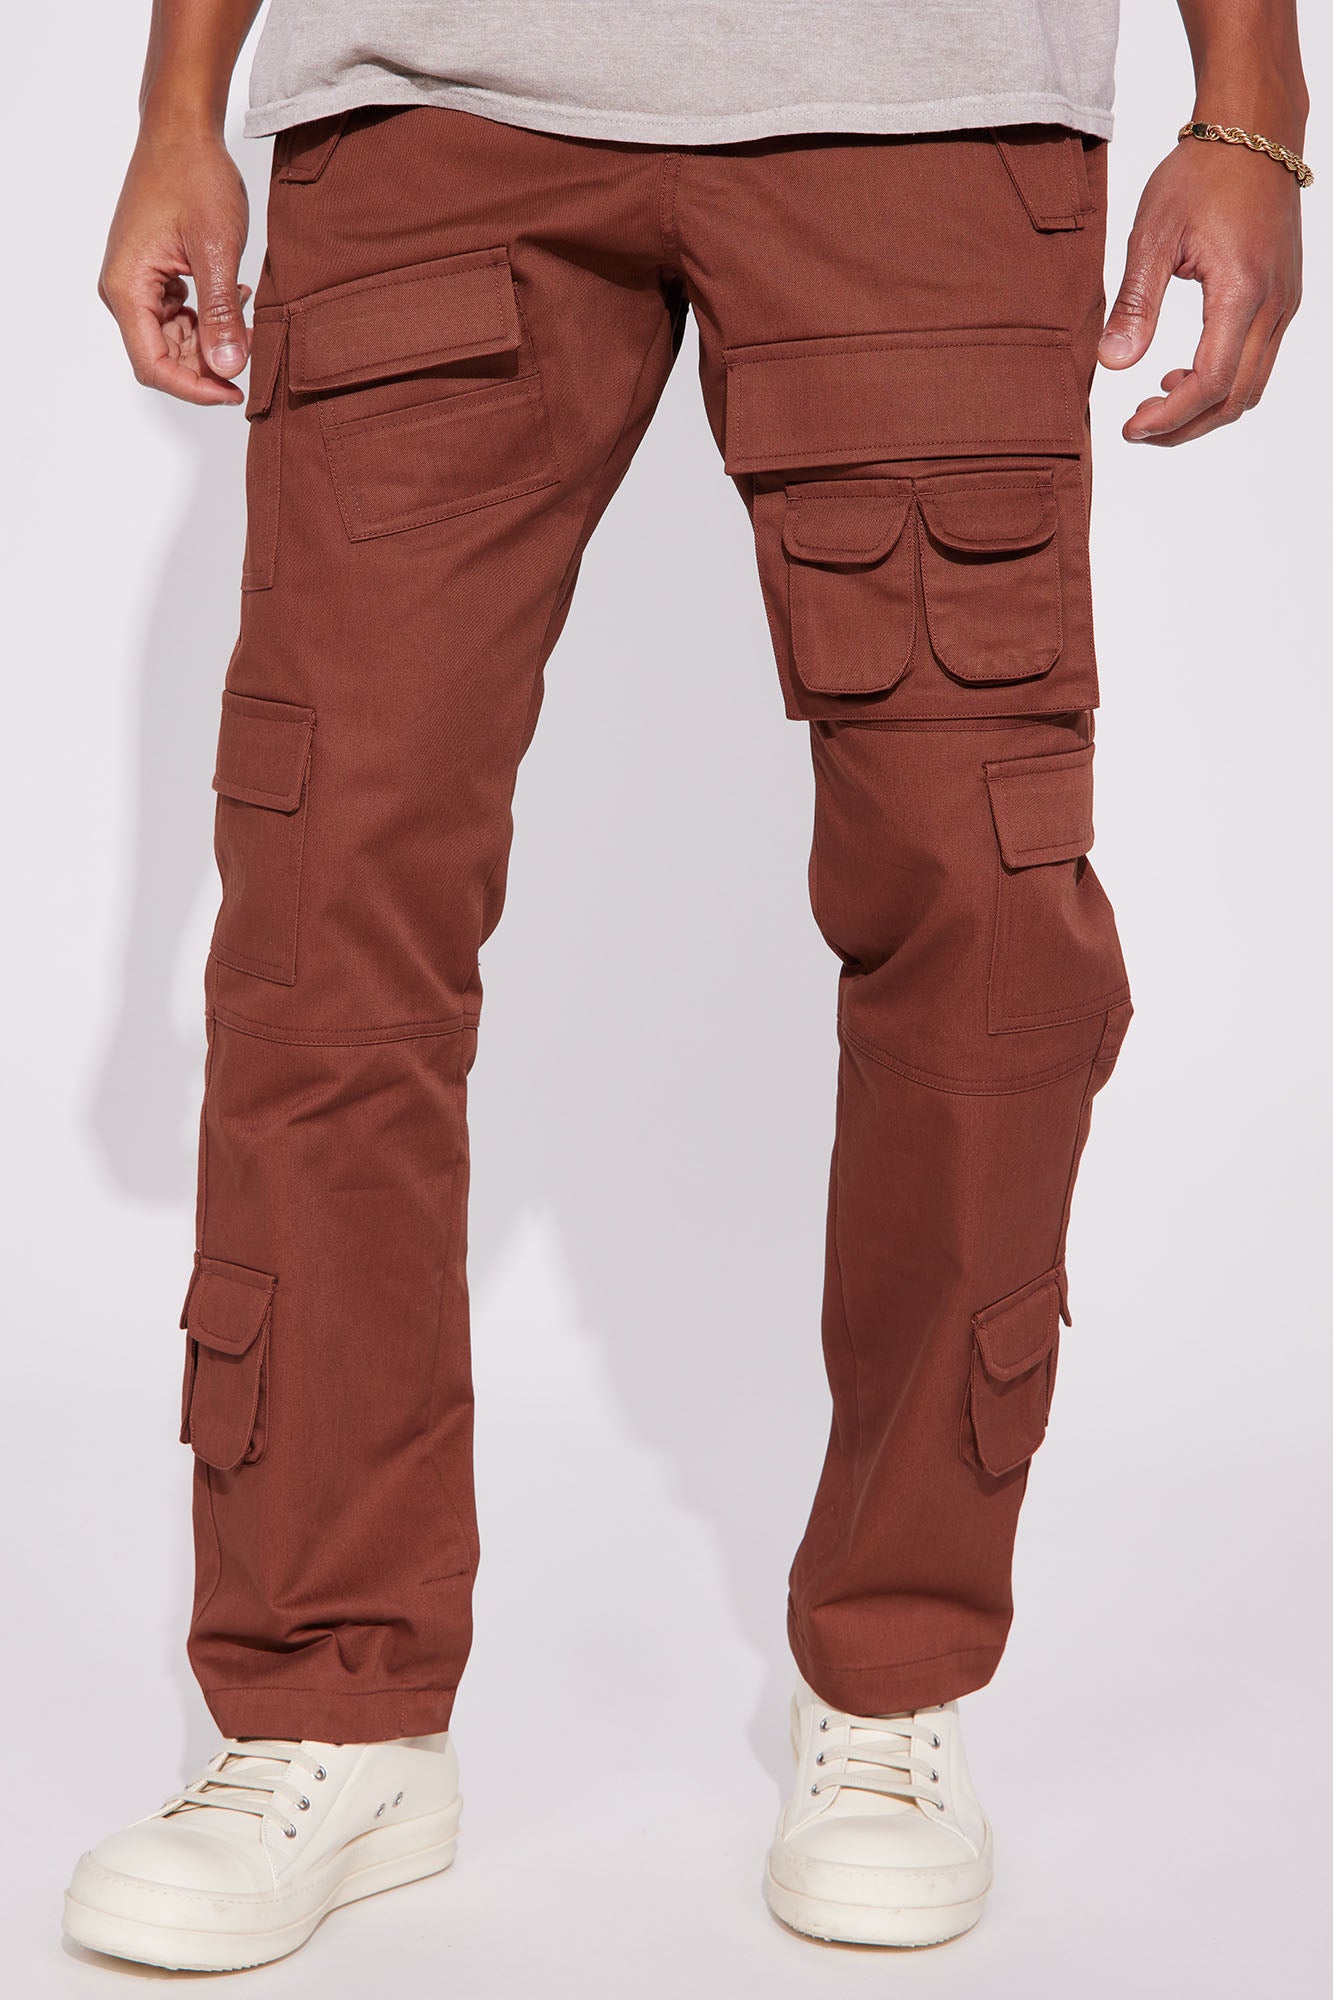 On So Many Levels Cargo Pants - Brown